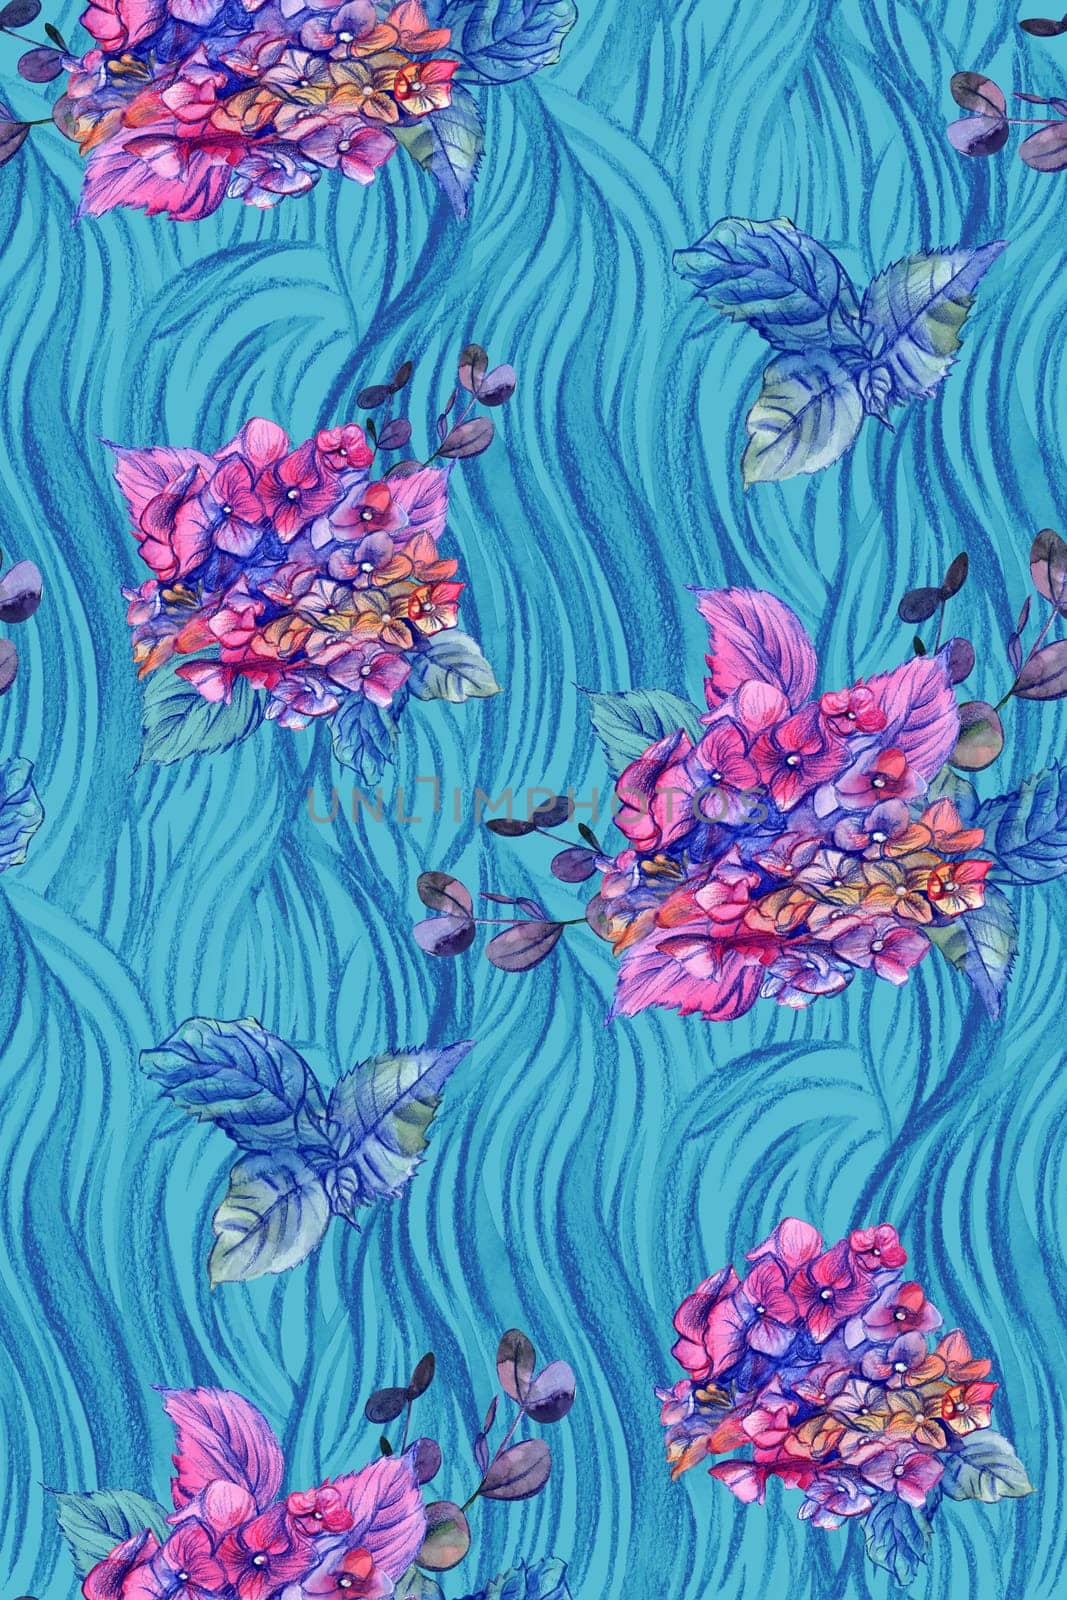 Turquoise seamless floral watercolor pattern with pink hydrangeas drawn in pencil with vertical wavy texture for textile and surface design